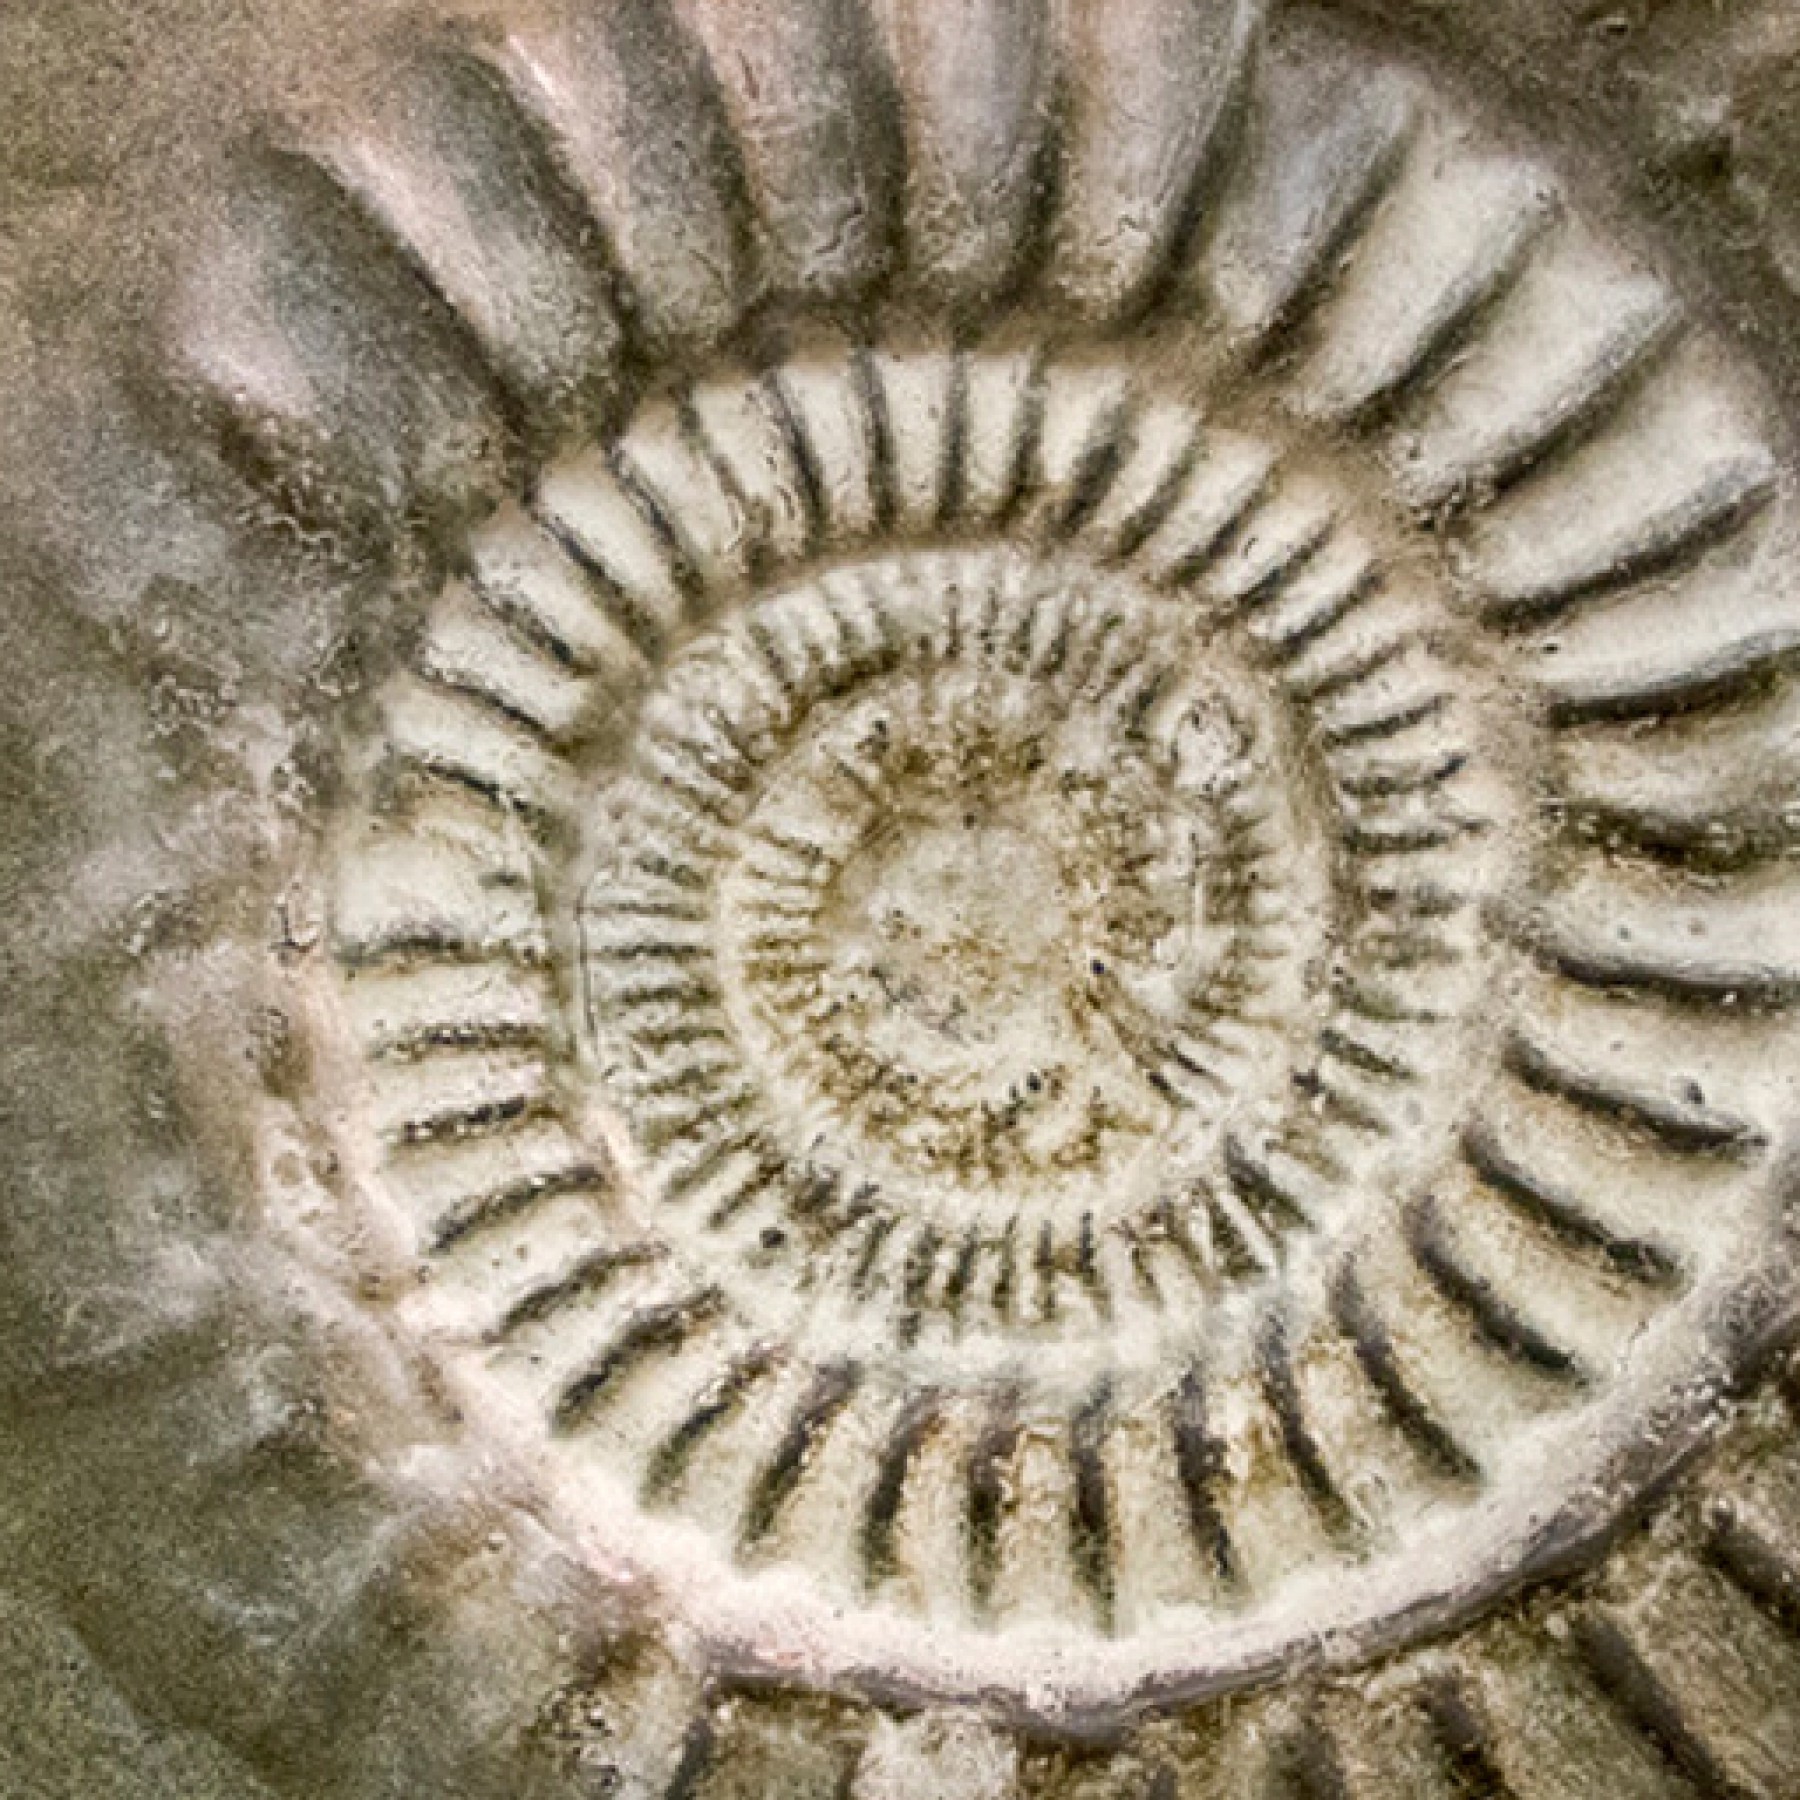 fossil-discovery-history-travel-adventure-kids-adults-science-tech-education-main-location1